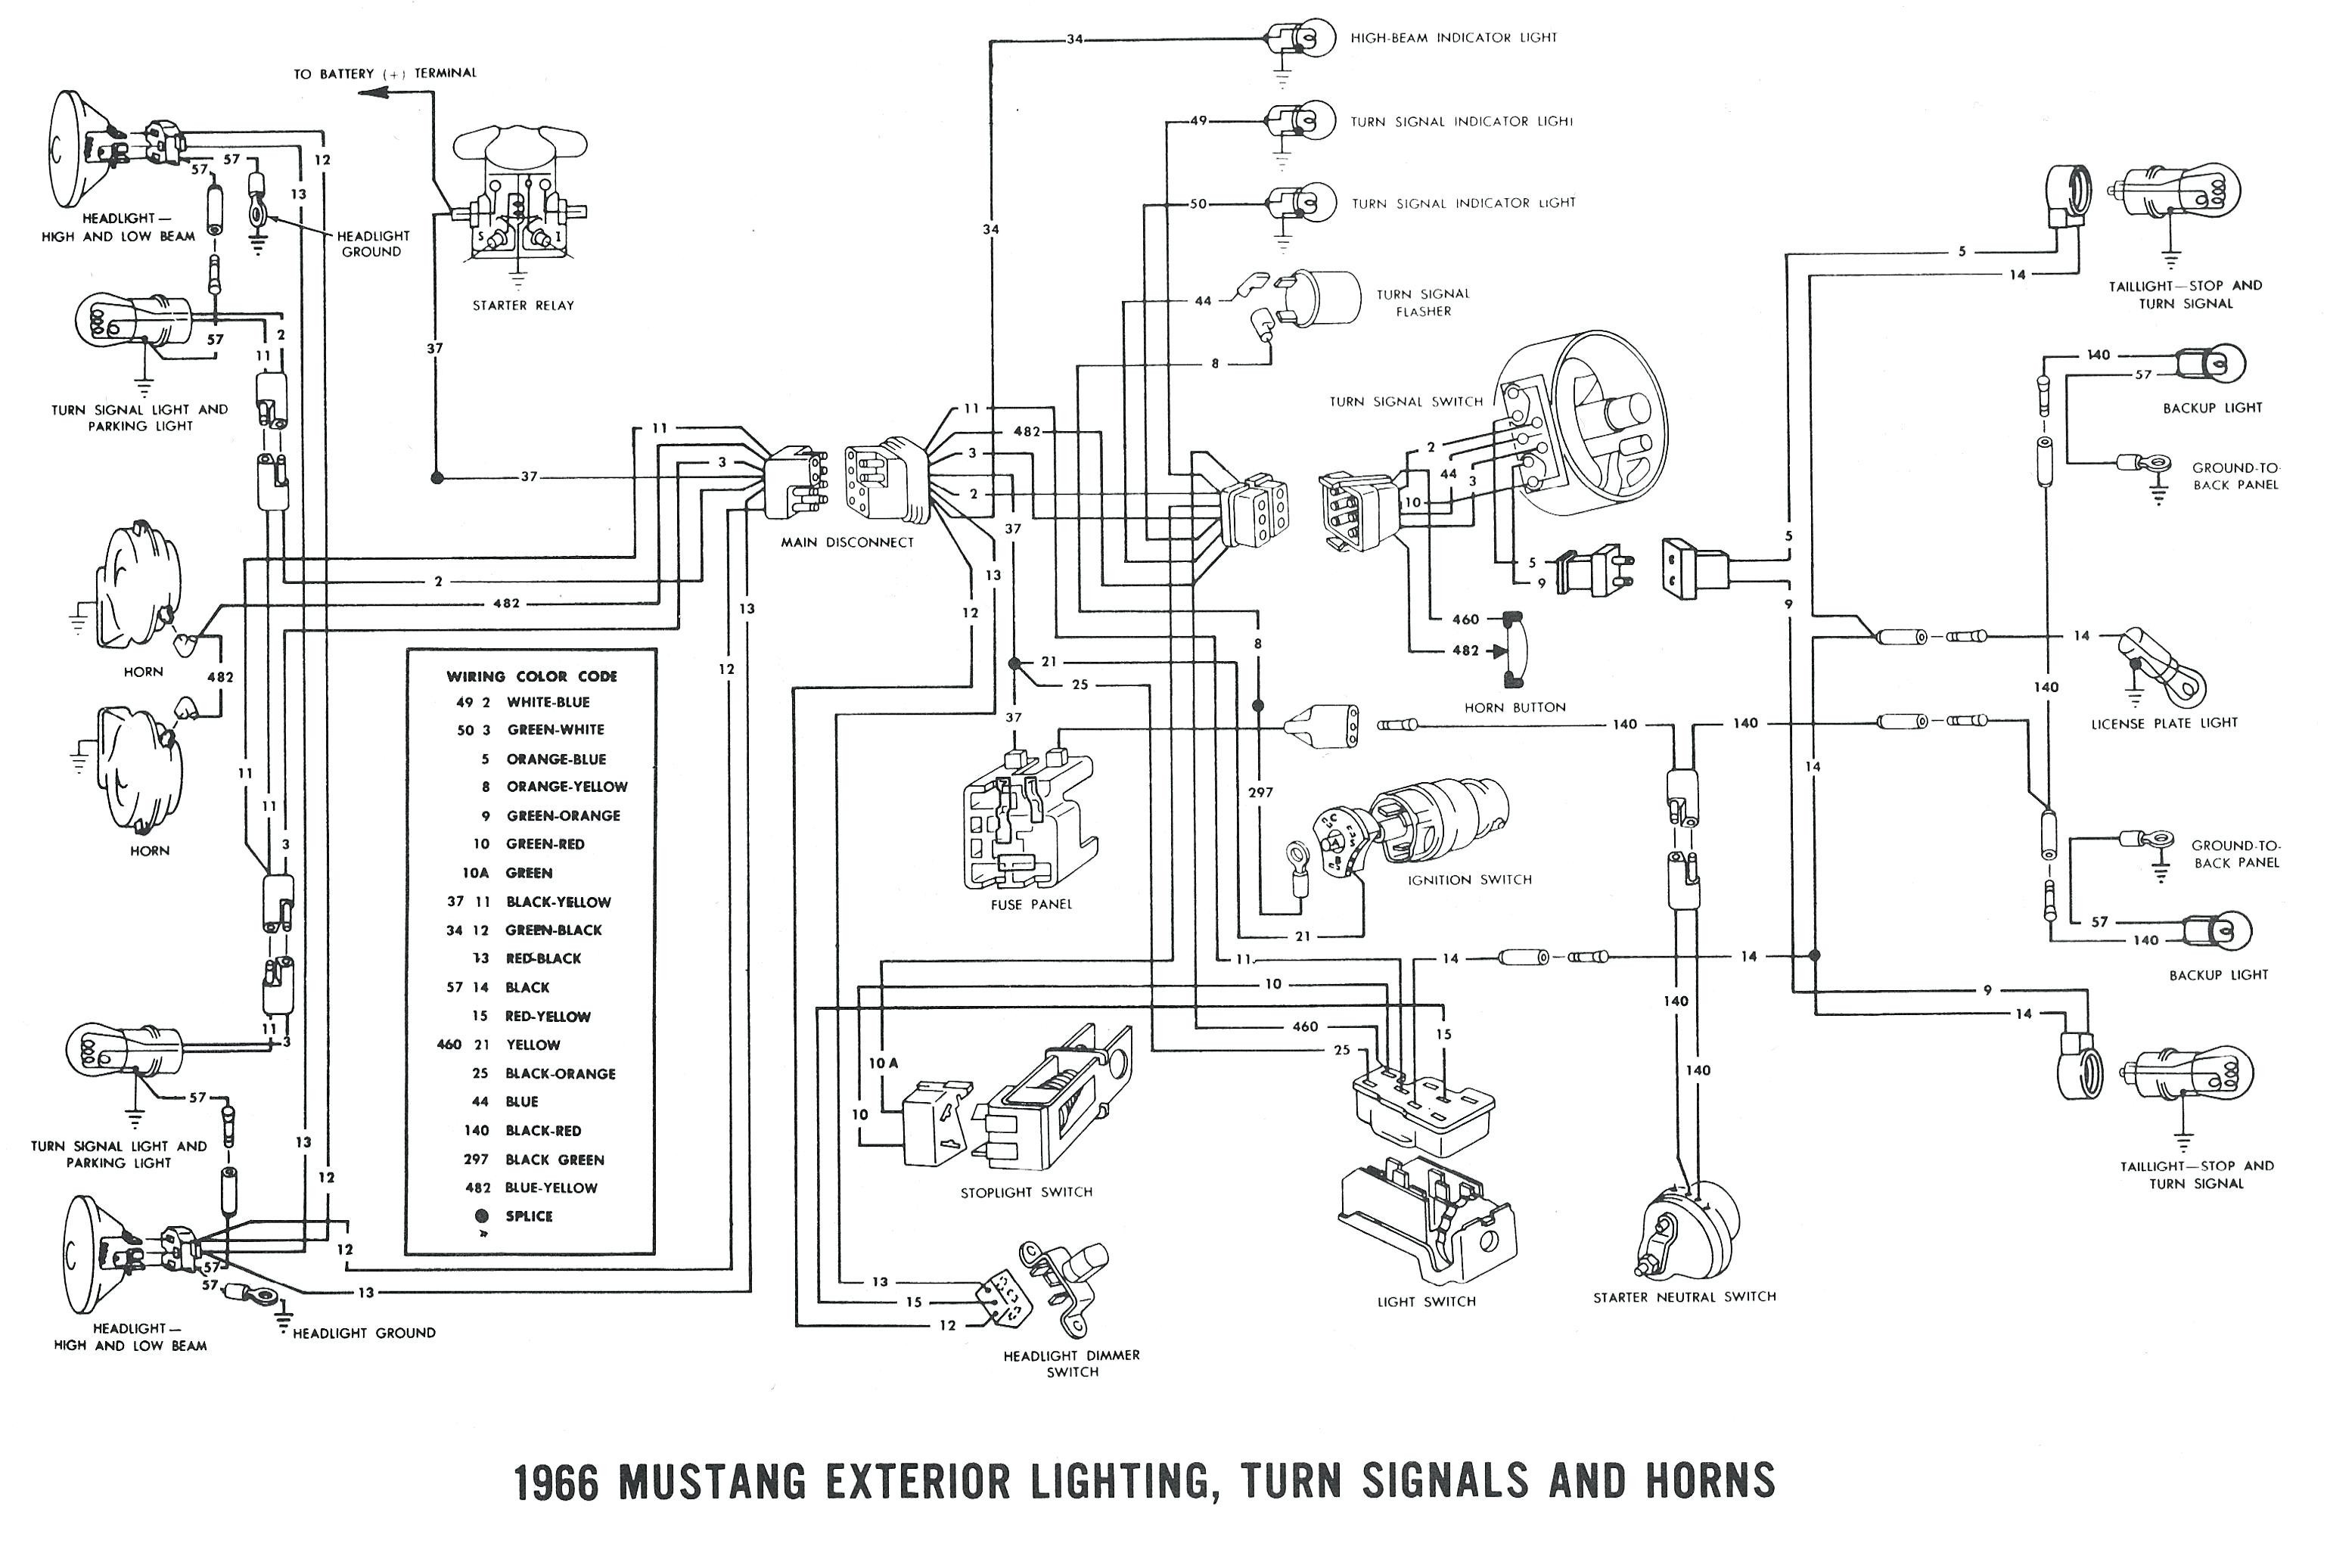 Ford Truck Wiring Diagram from mainetreasurechest.com